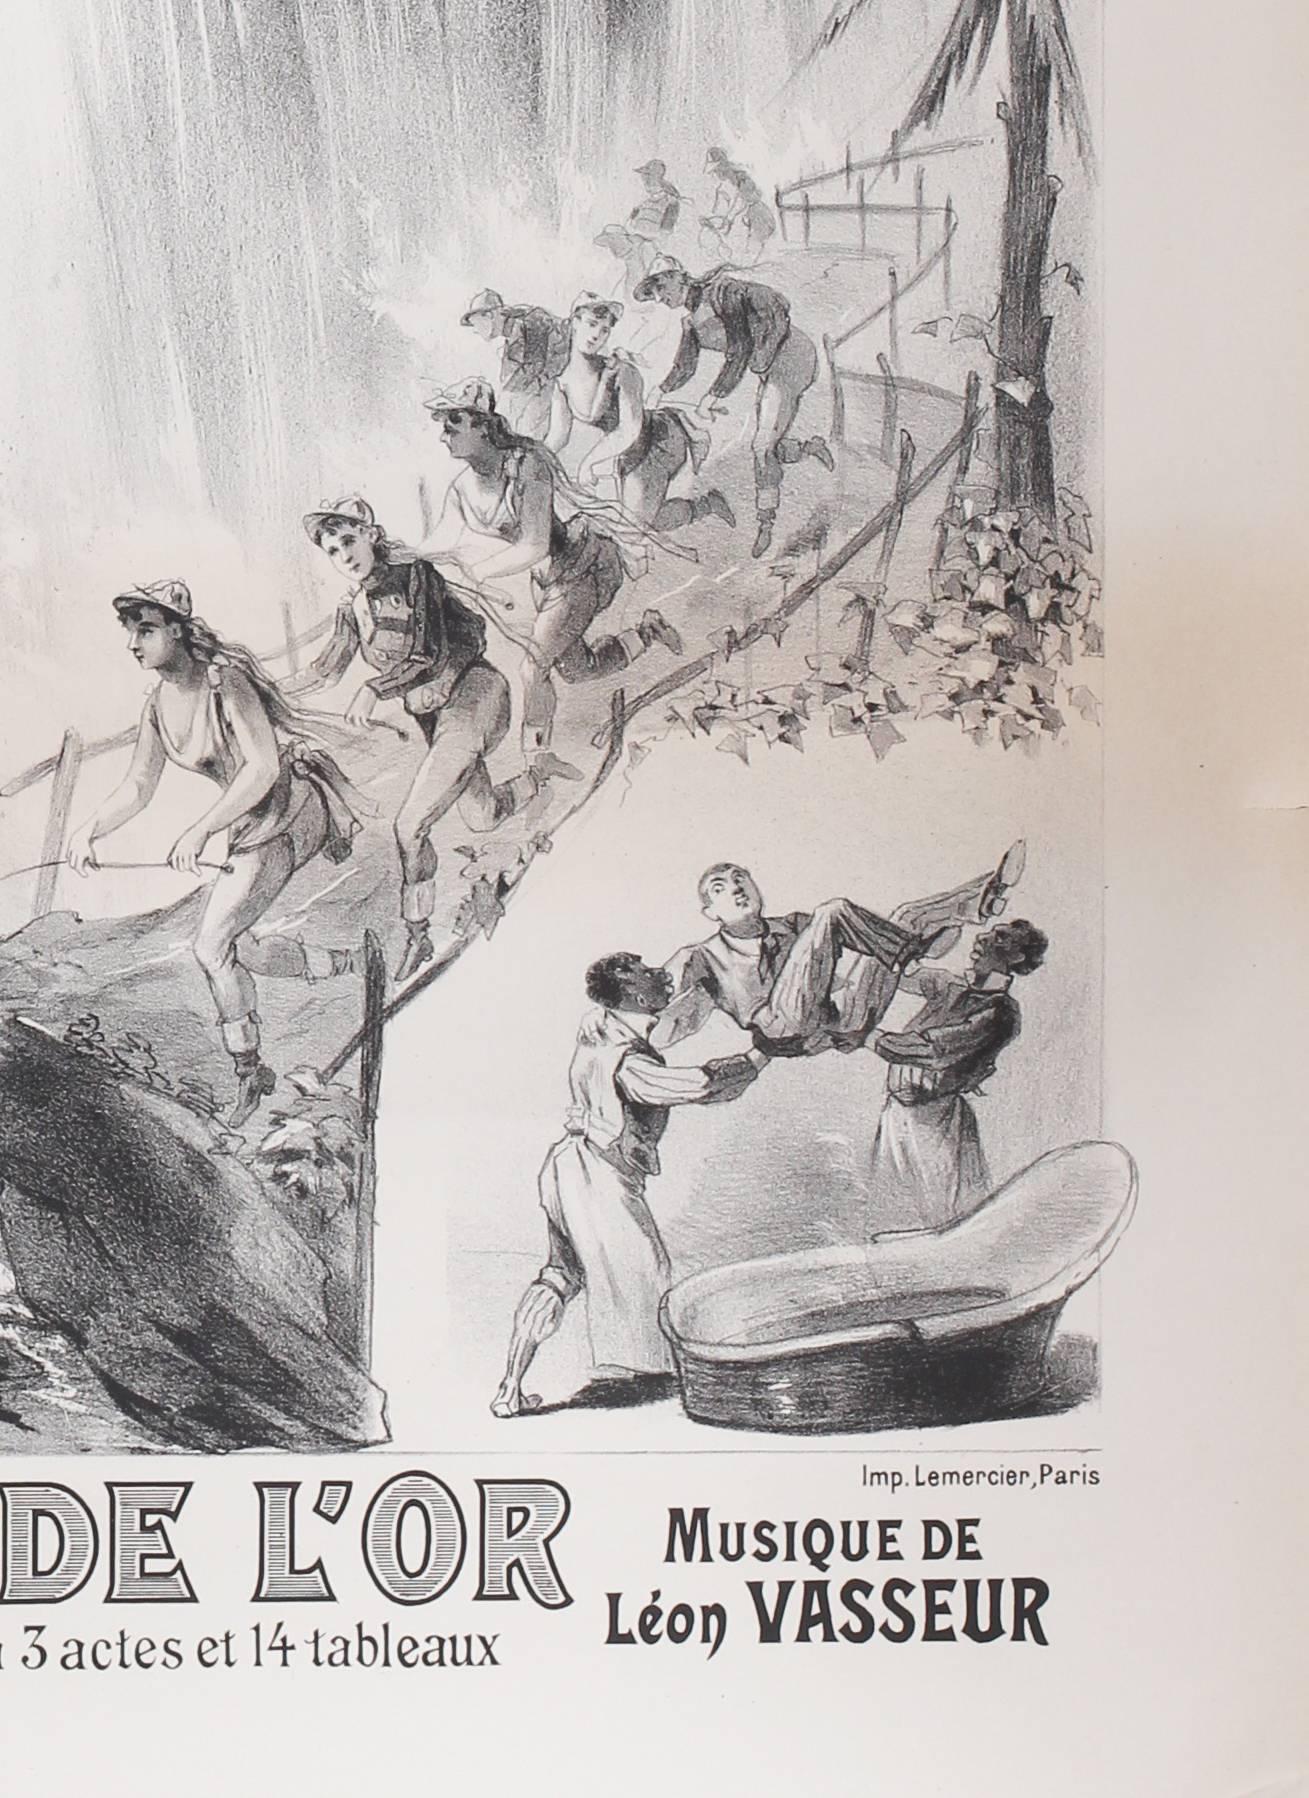 A poster design for a musical play, in black and white, designed by LE Maresquier


